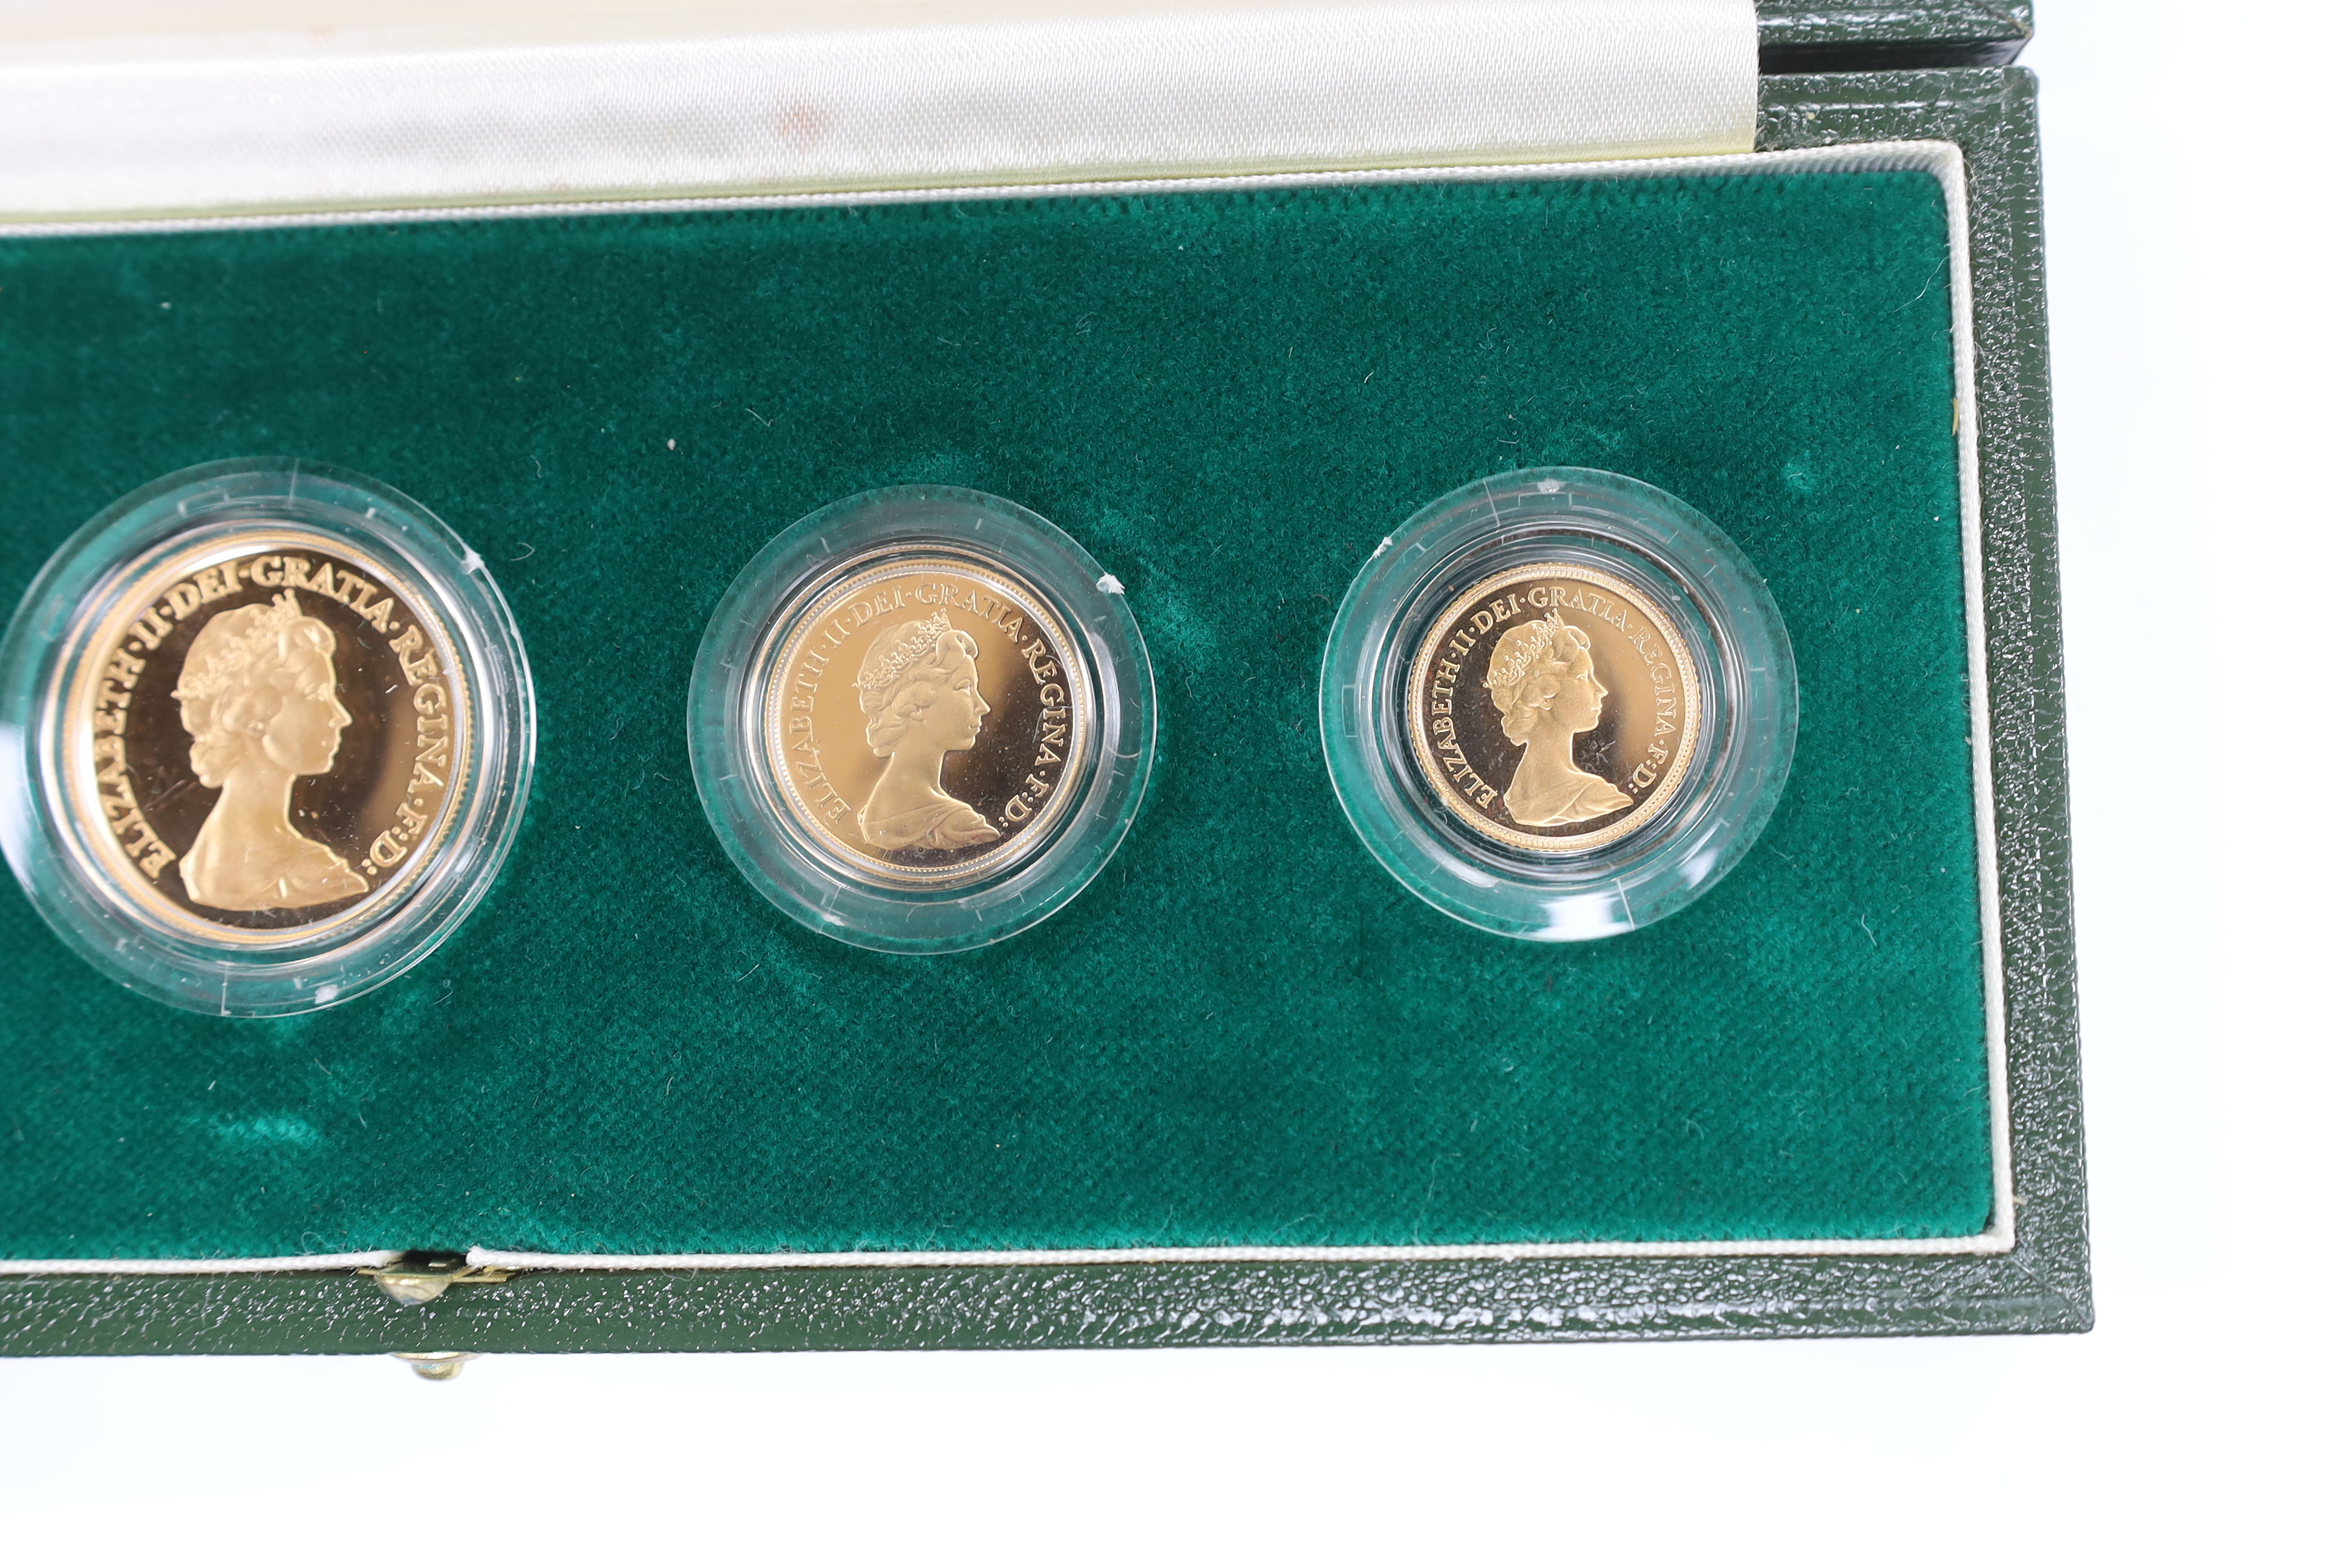 British gold coins - A Royal Mint UK QEII Gold Proof Set, 1980, comprising £5, £2, sovereign and - Image 3 of 3